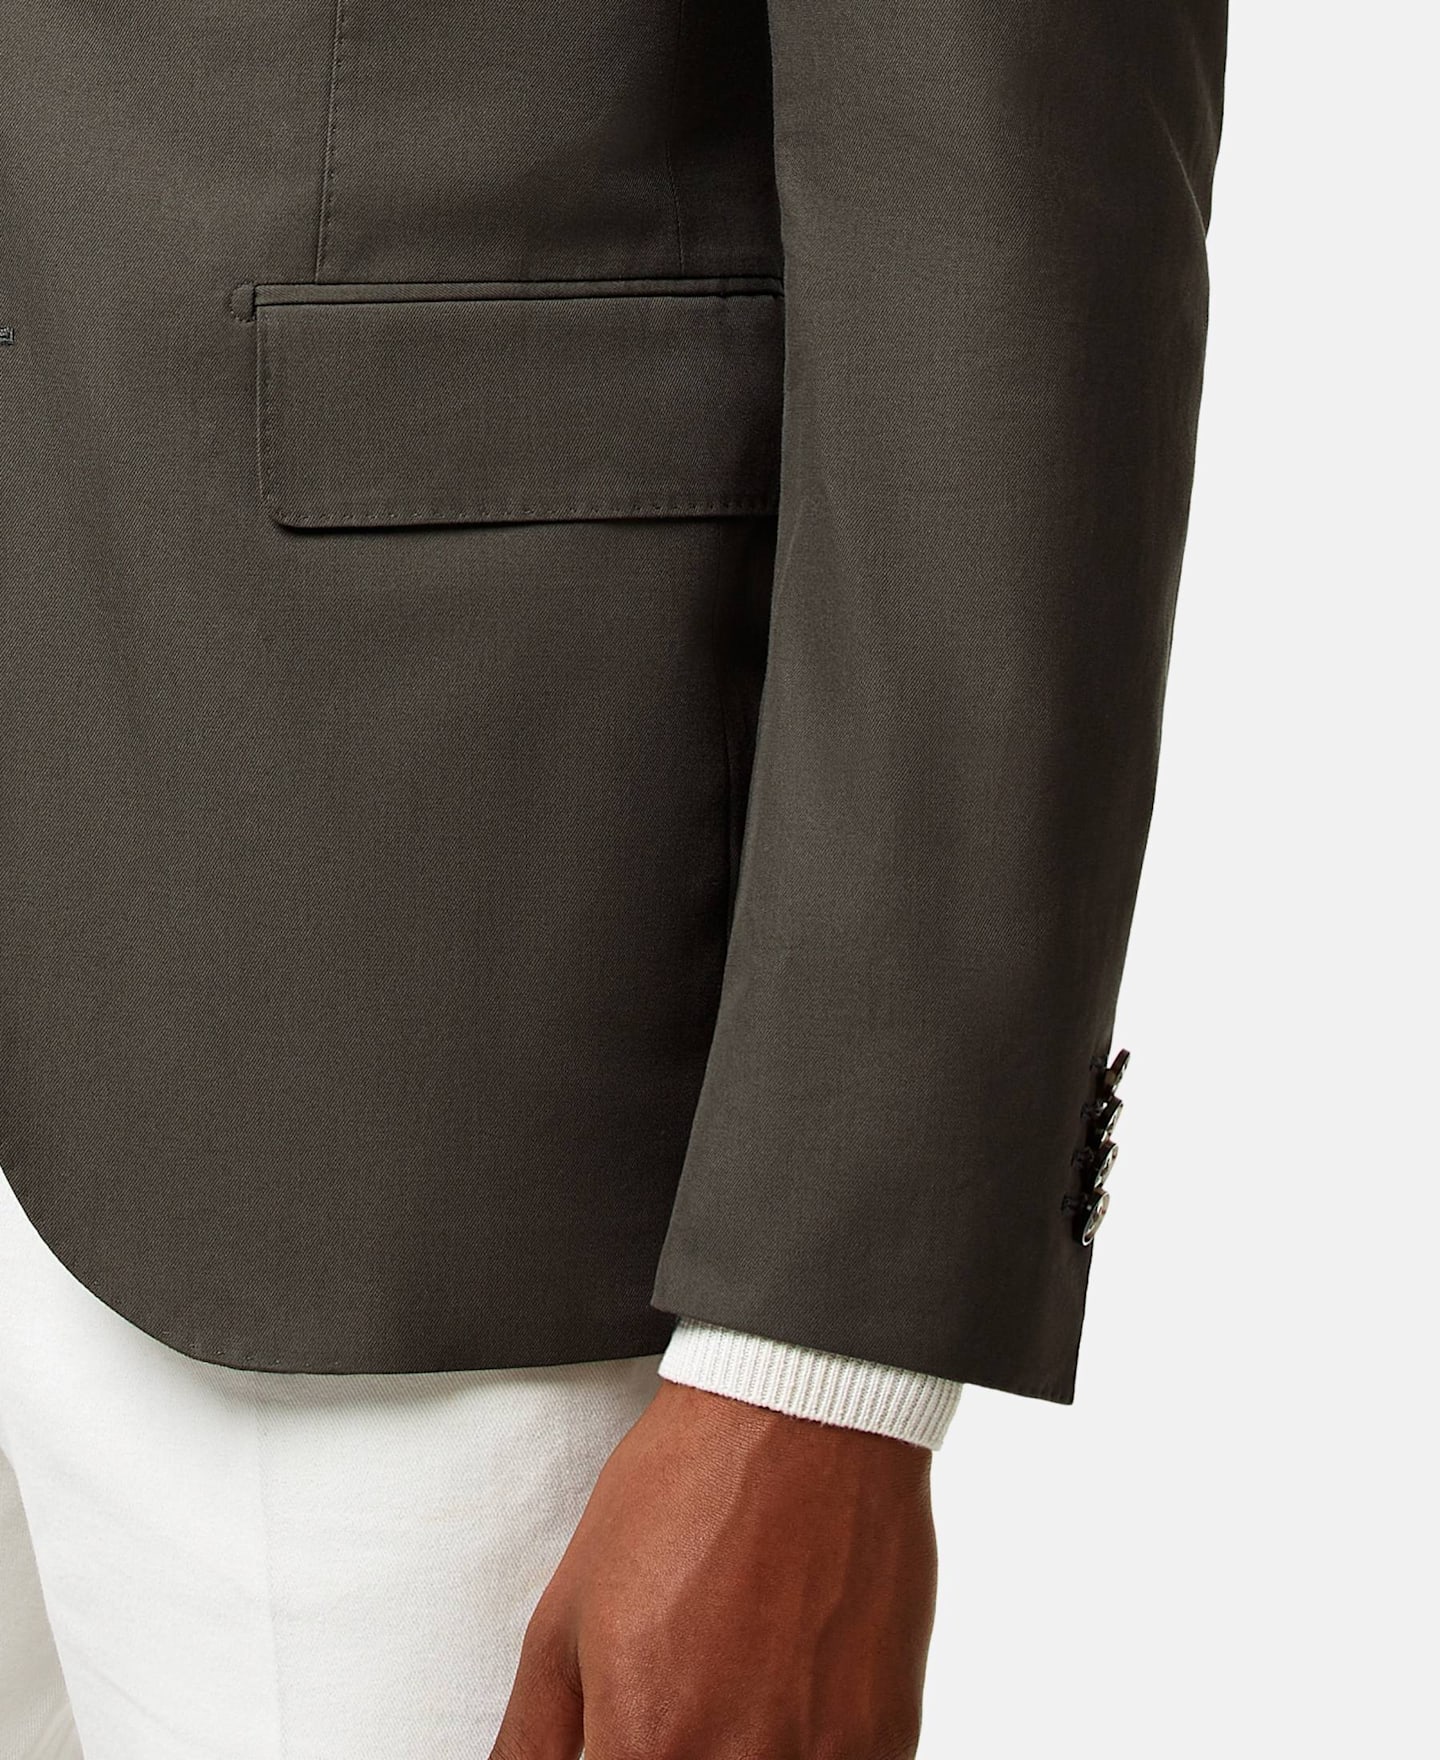 A classic flap pocket that haws fabric stitched to the upper welt.